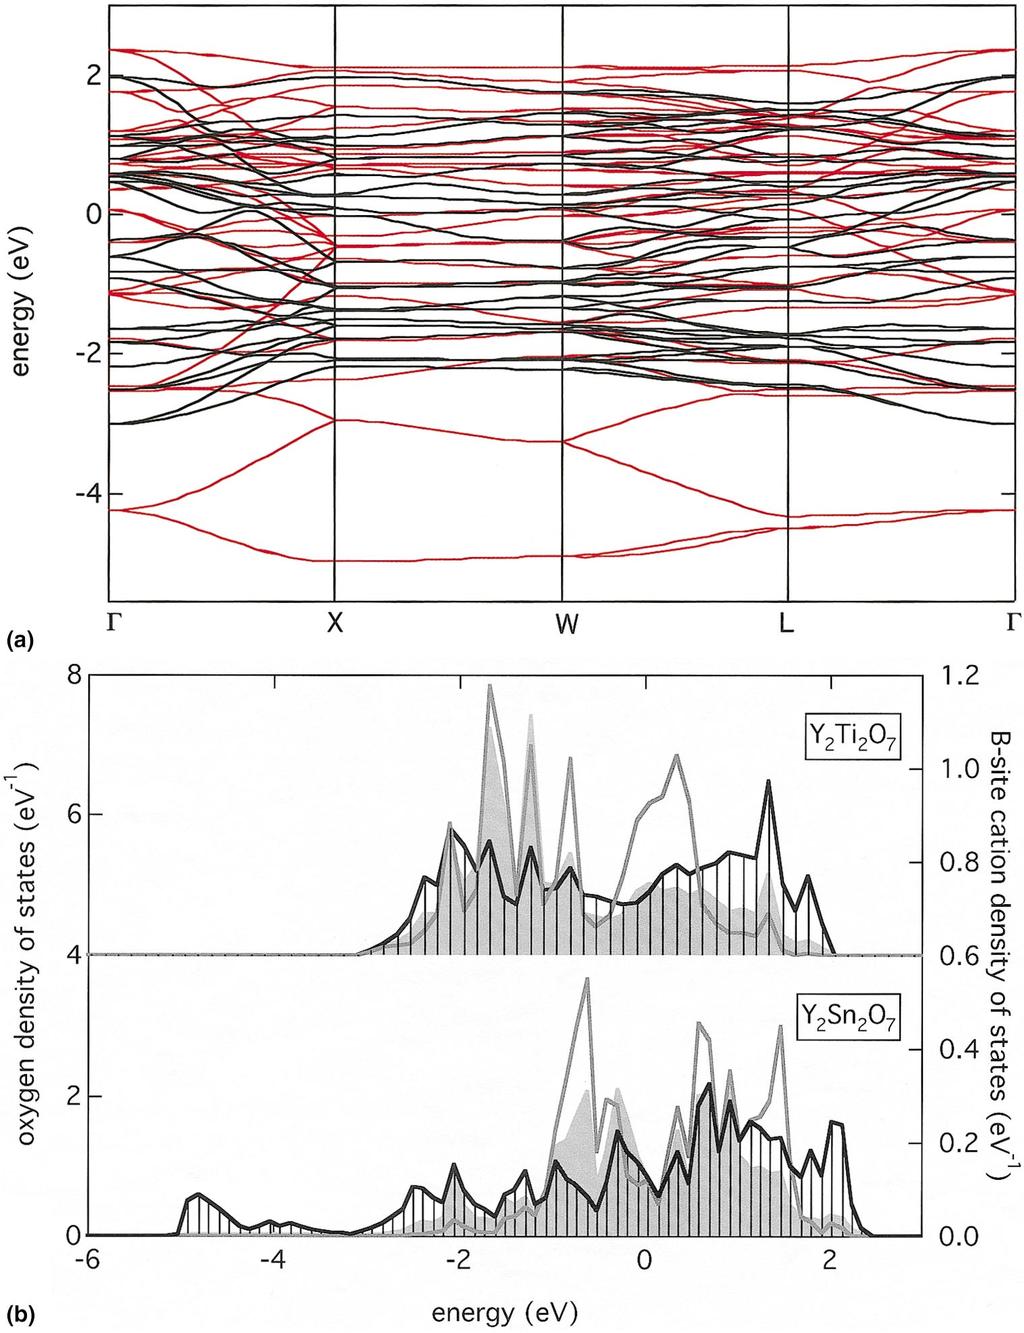 FIRST-PRINCIPLES CALCULATION OF DEFECT- PHYSICAL REVIEW B 70, 054110 (2004) FIG. 4. (Color) (a) Valence O 2p bands for ordered Y 2 Sn 2 O 7 (red) and Y 2 Ti 2 O 7 (black).